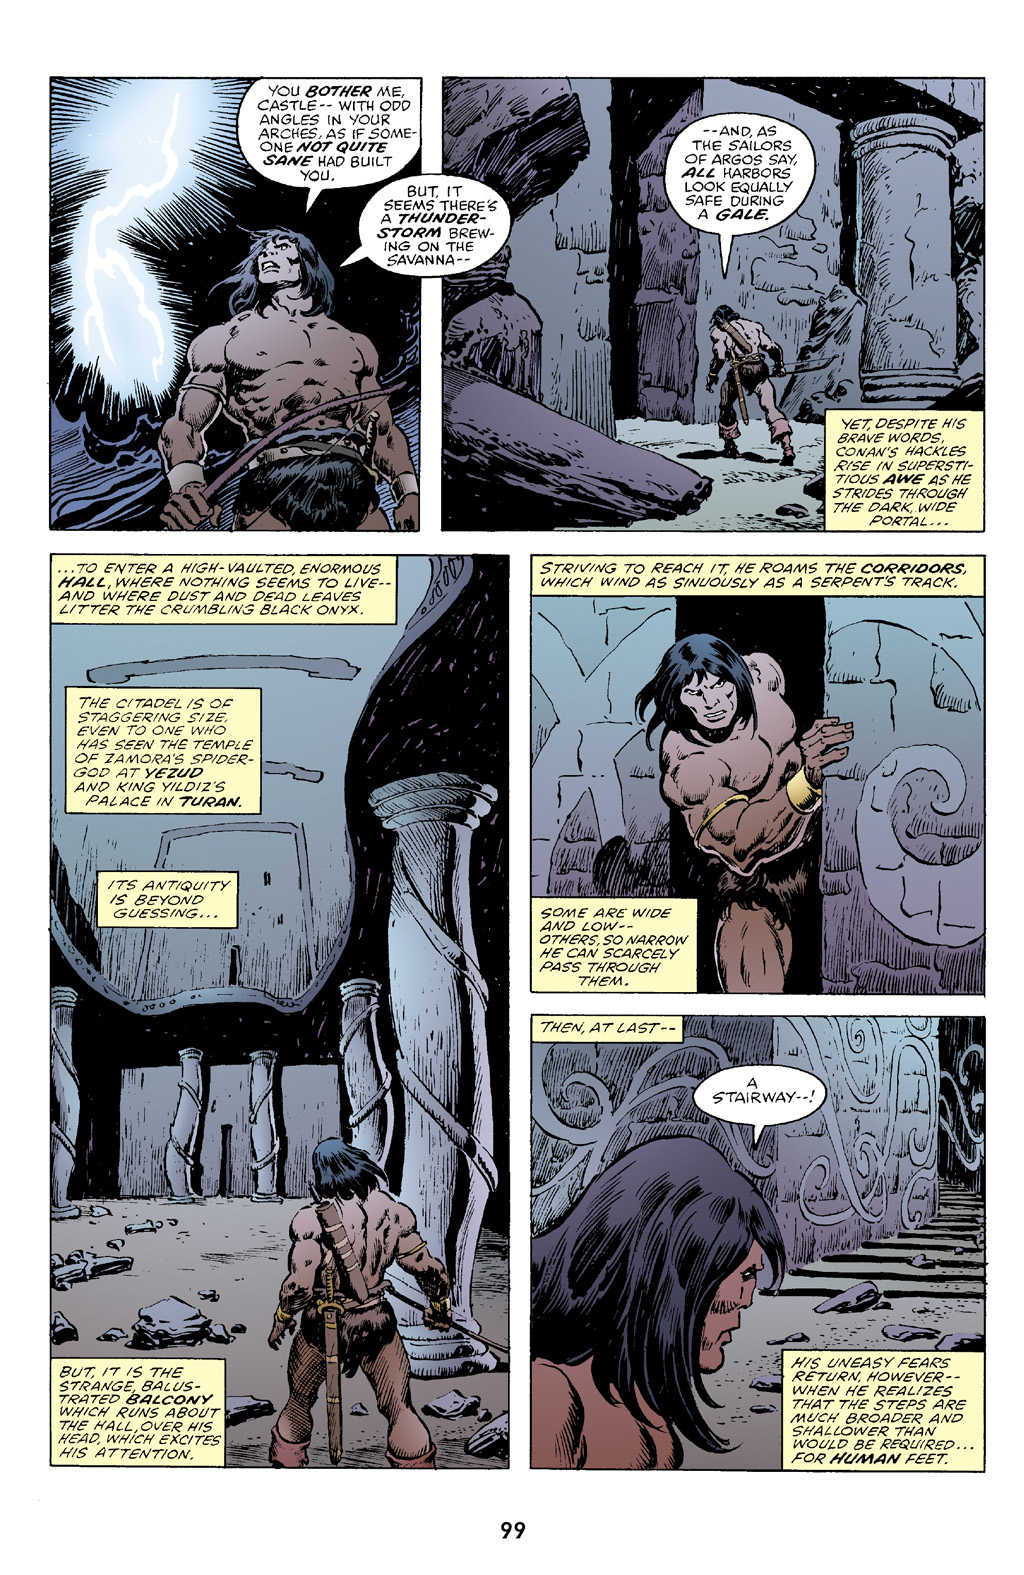 The Chronicles Of Conan Tpb 13 Part | Read The Chronicles Of Conan 13 Part 2 comic online in high quality. Read Full Comic online for free - Read comics online in high quality .